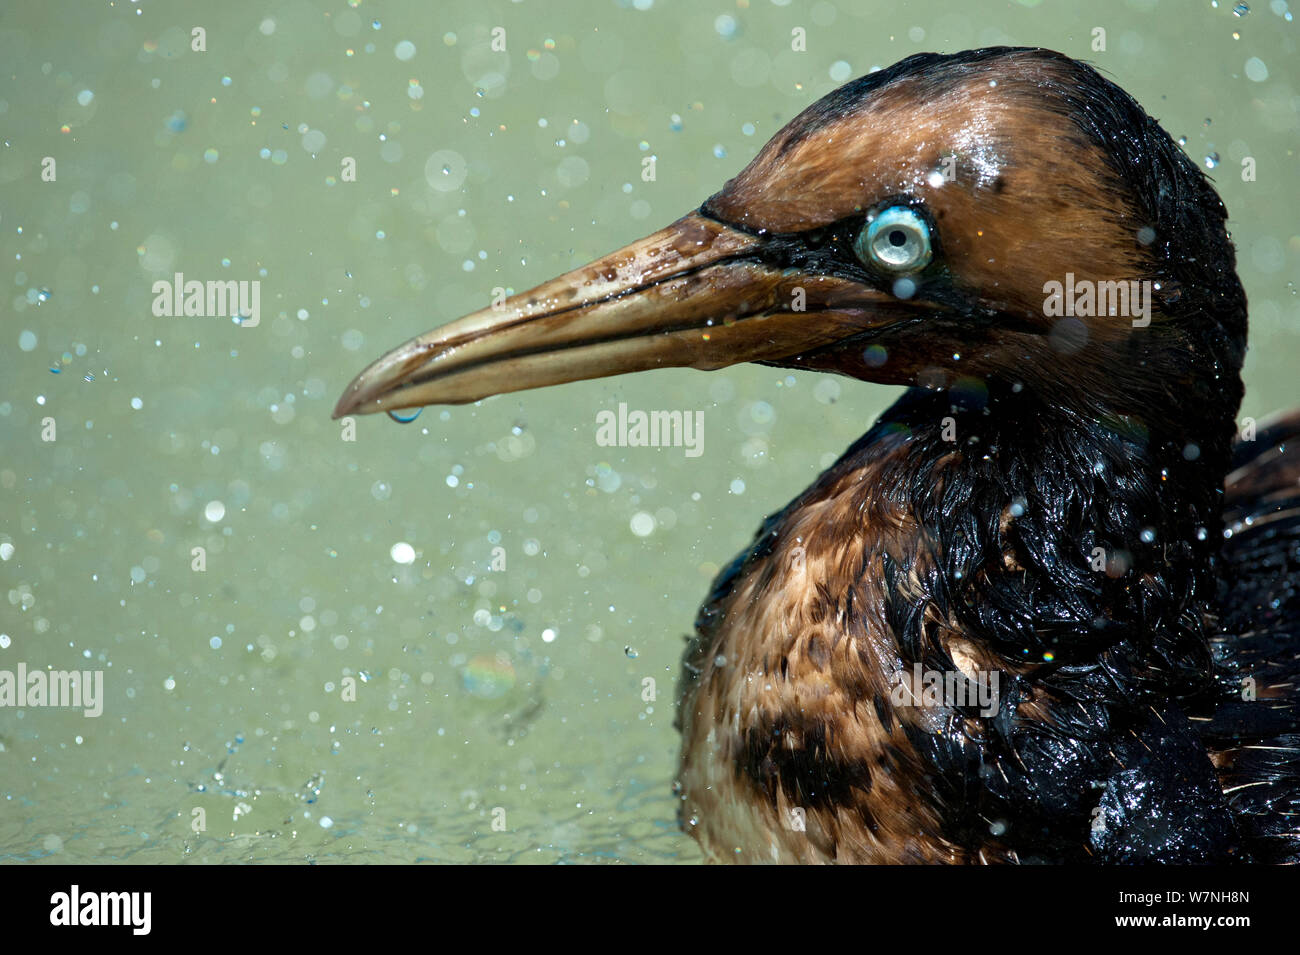 Cape gannet (Morus capensis) coated in oil swimming in pool at the Southern African Foundation for the Conservation of Coastal Birds (SANCCOB). Vulnerable species. Third place in Mankind and Nature  portfolio category of Melvita Nature Images Awards  2012, organised by Terre Sauvage. Stock Photo